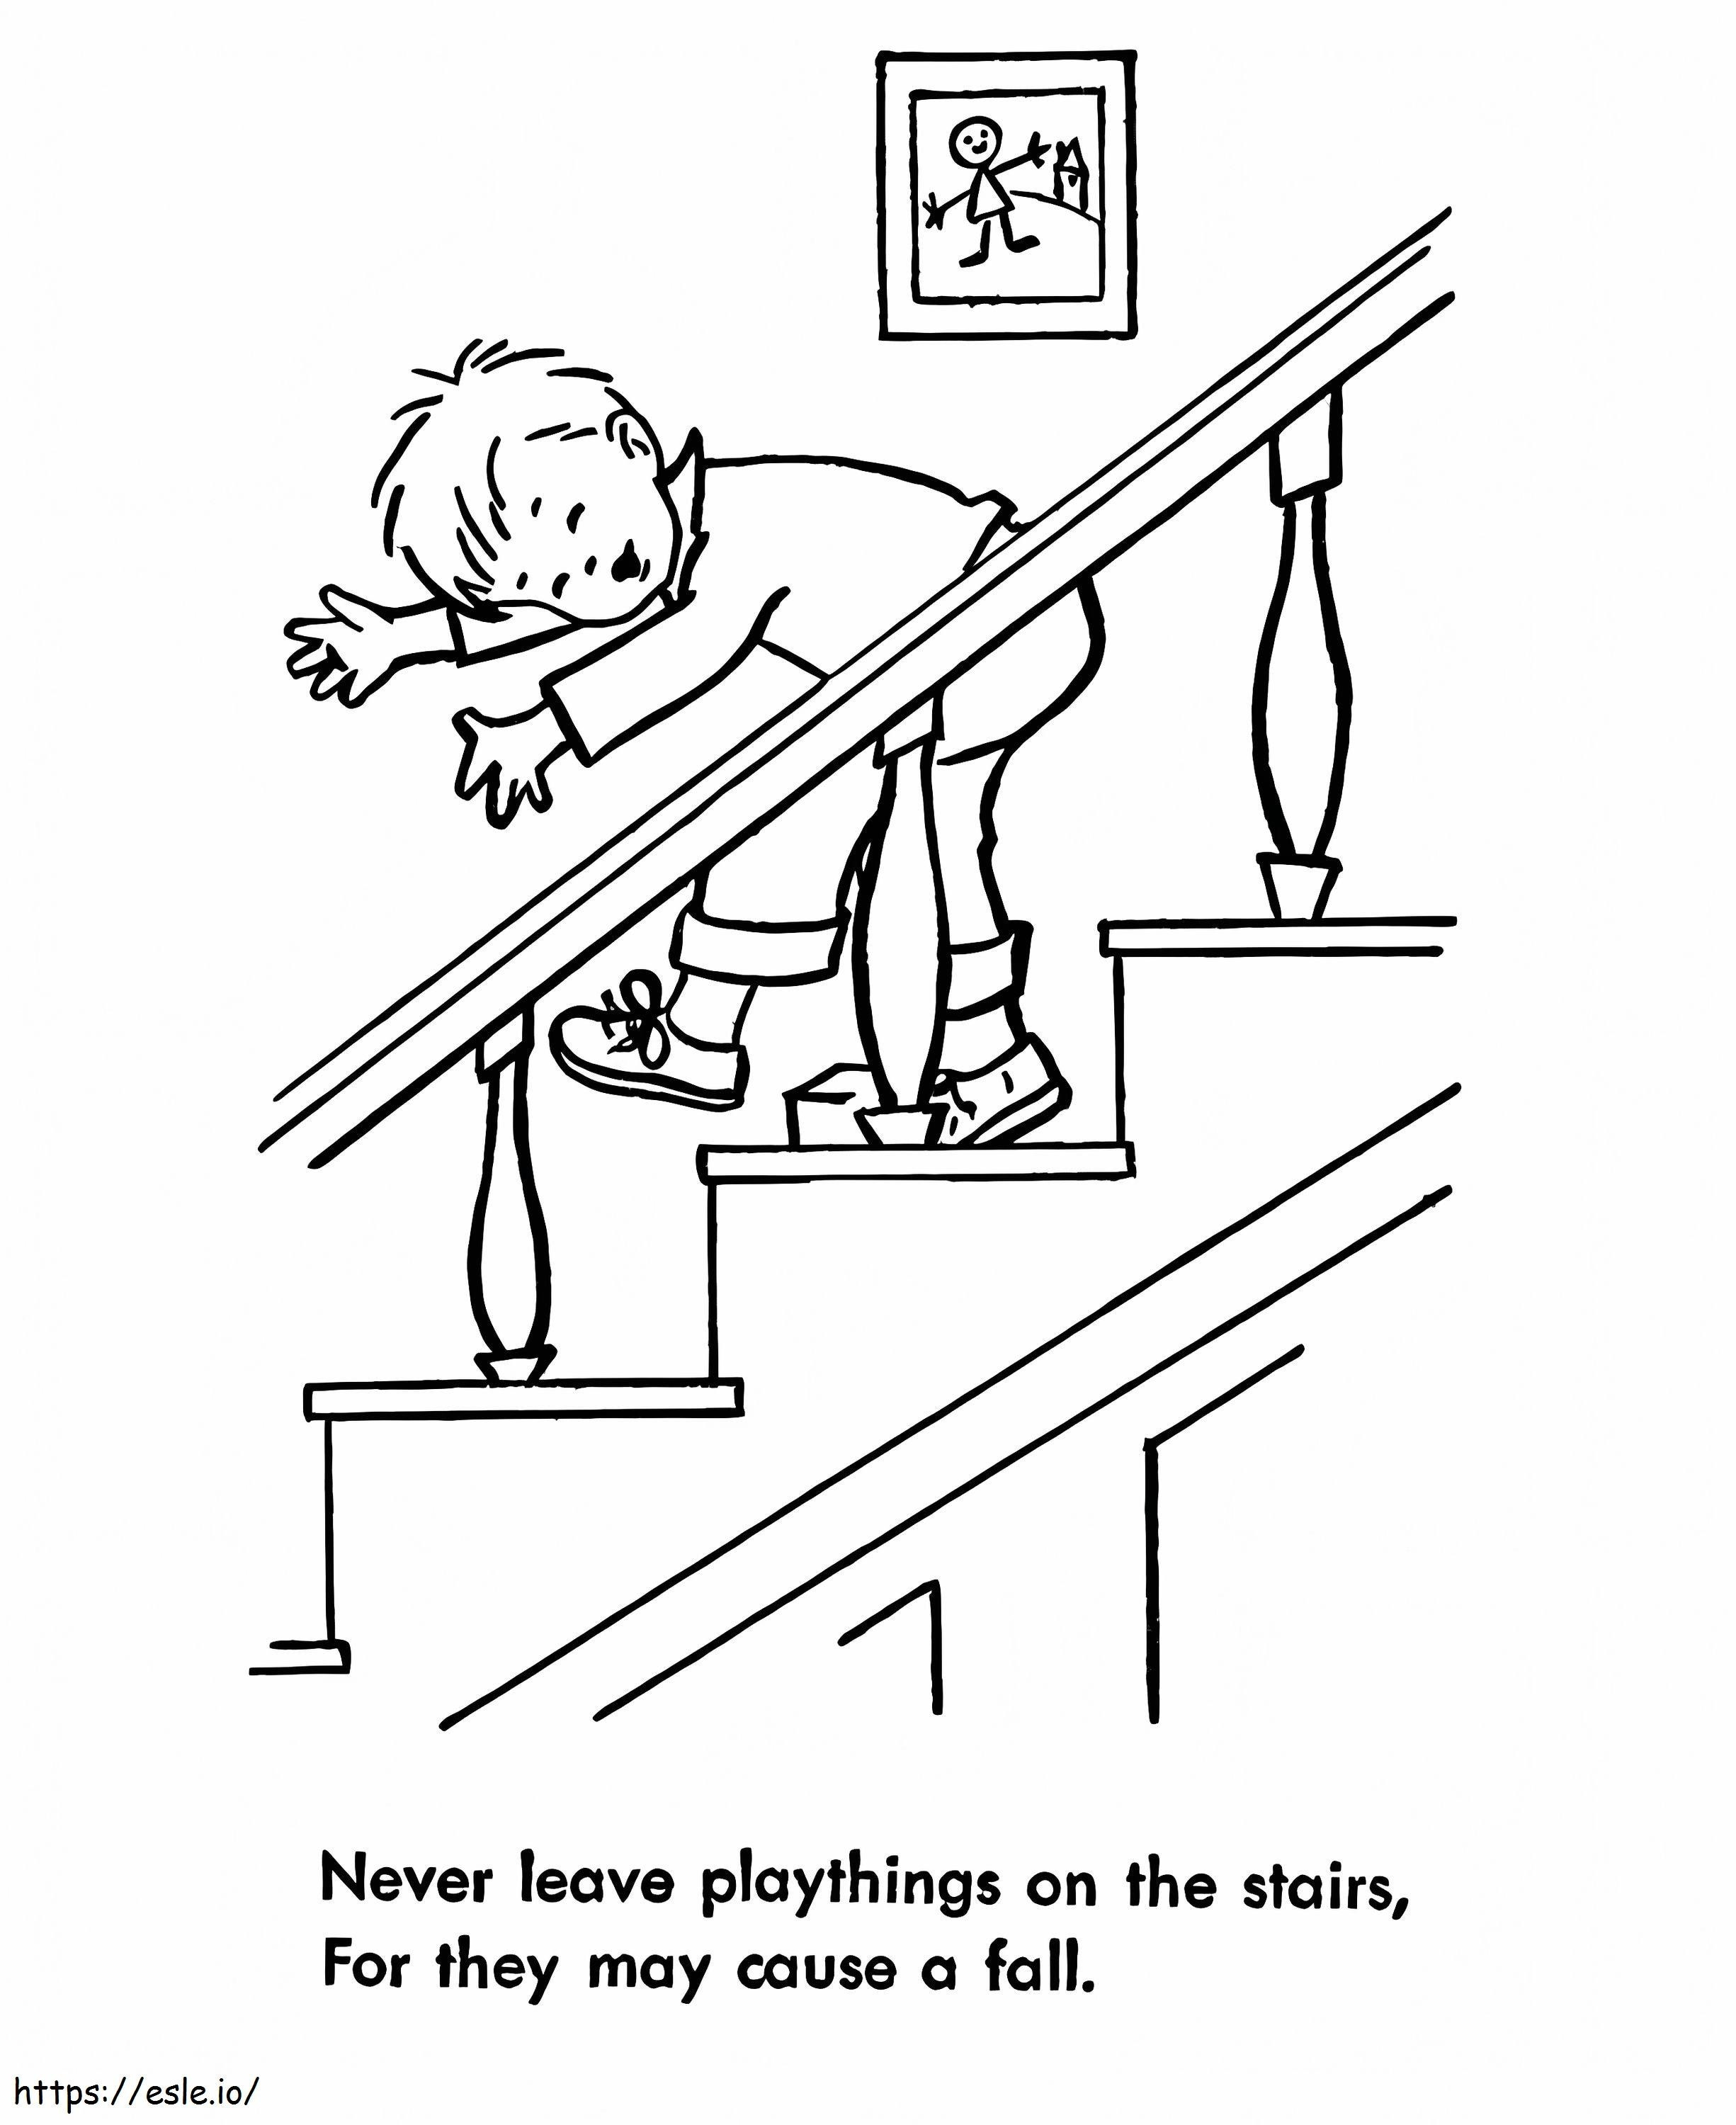 Stairs Safety coloring page